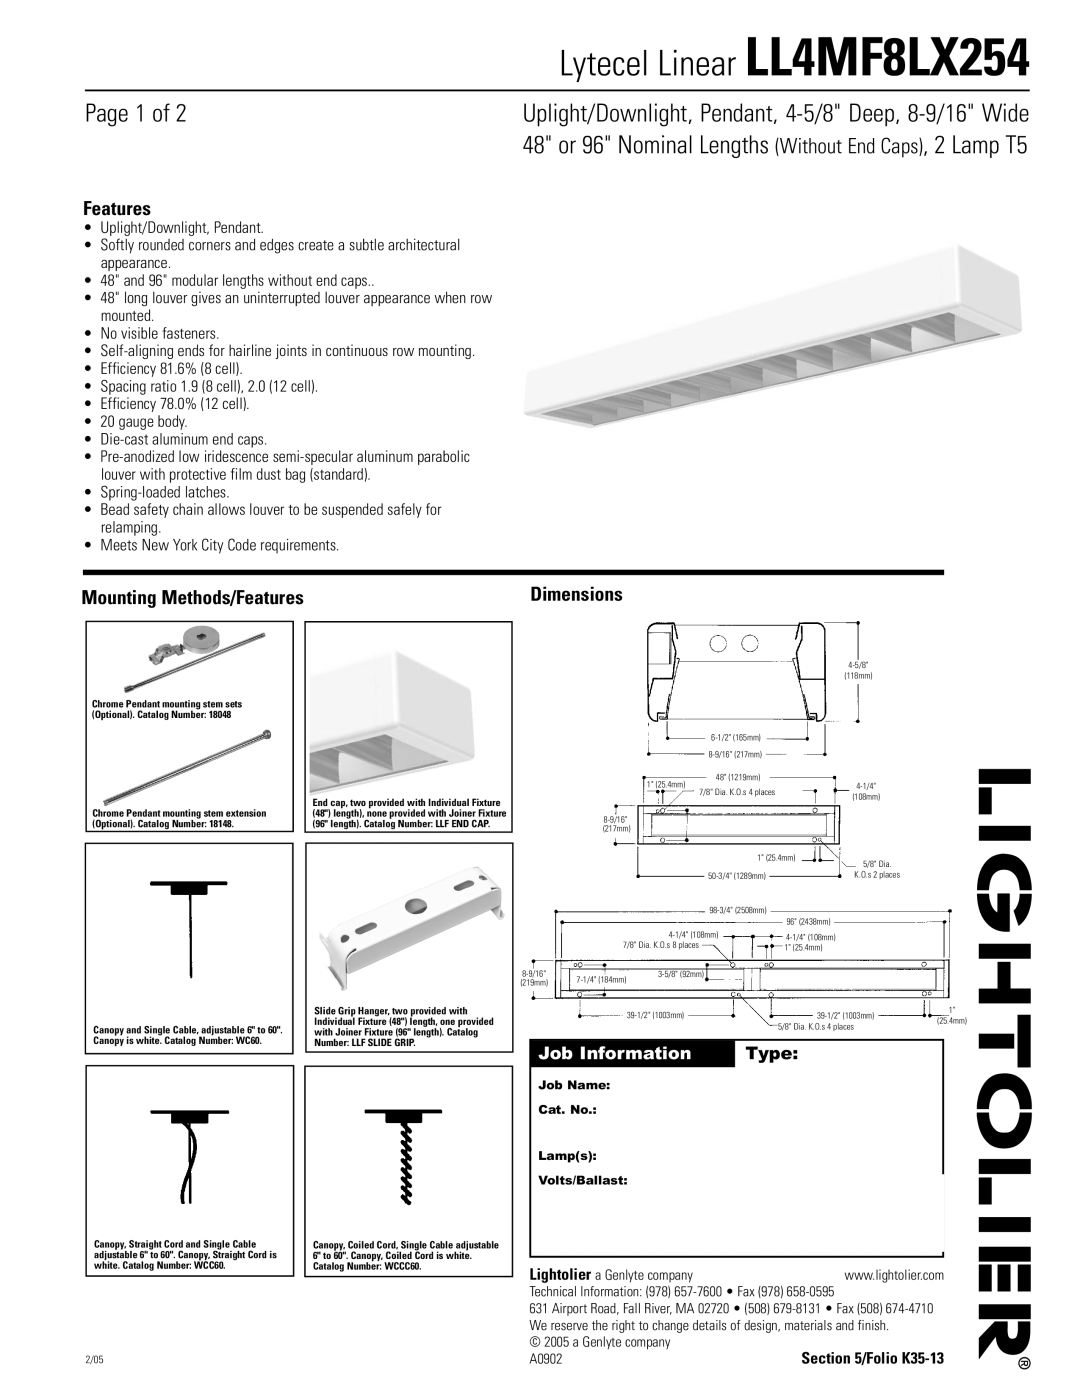 Lightolier dimensions Lytecel Linear LL4MF8LX254, Page 1 of, Mounting Methods/Features, Job Information, Type 